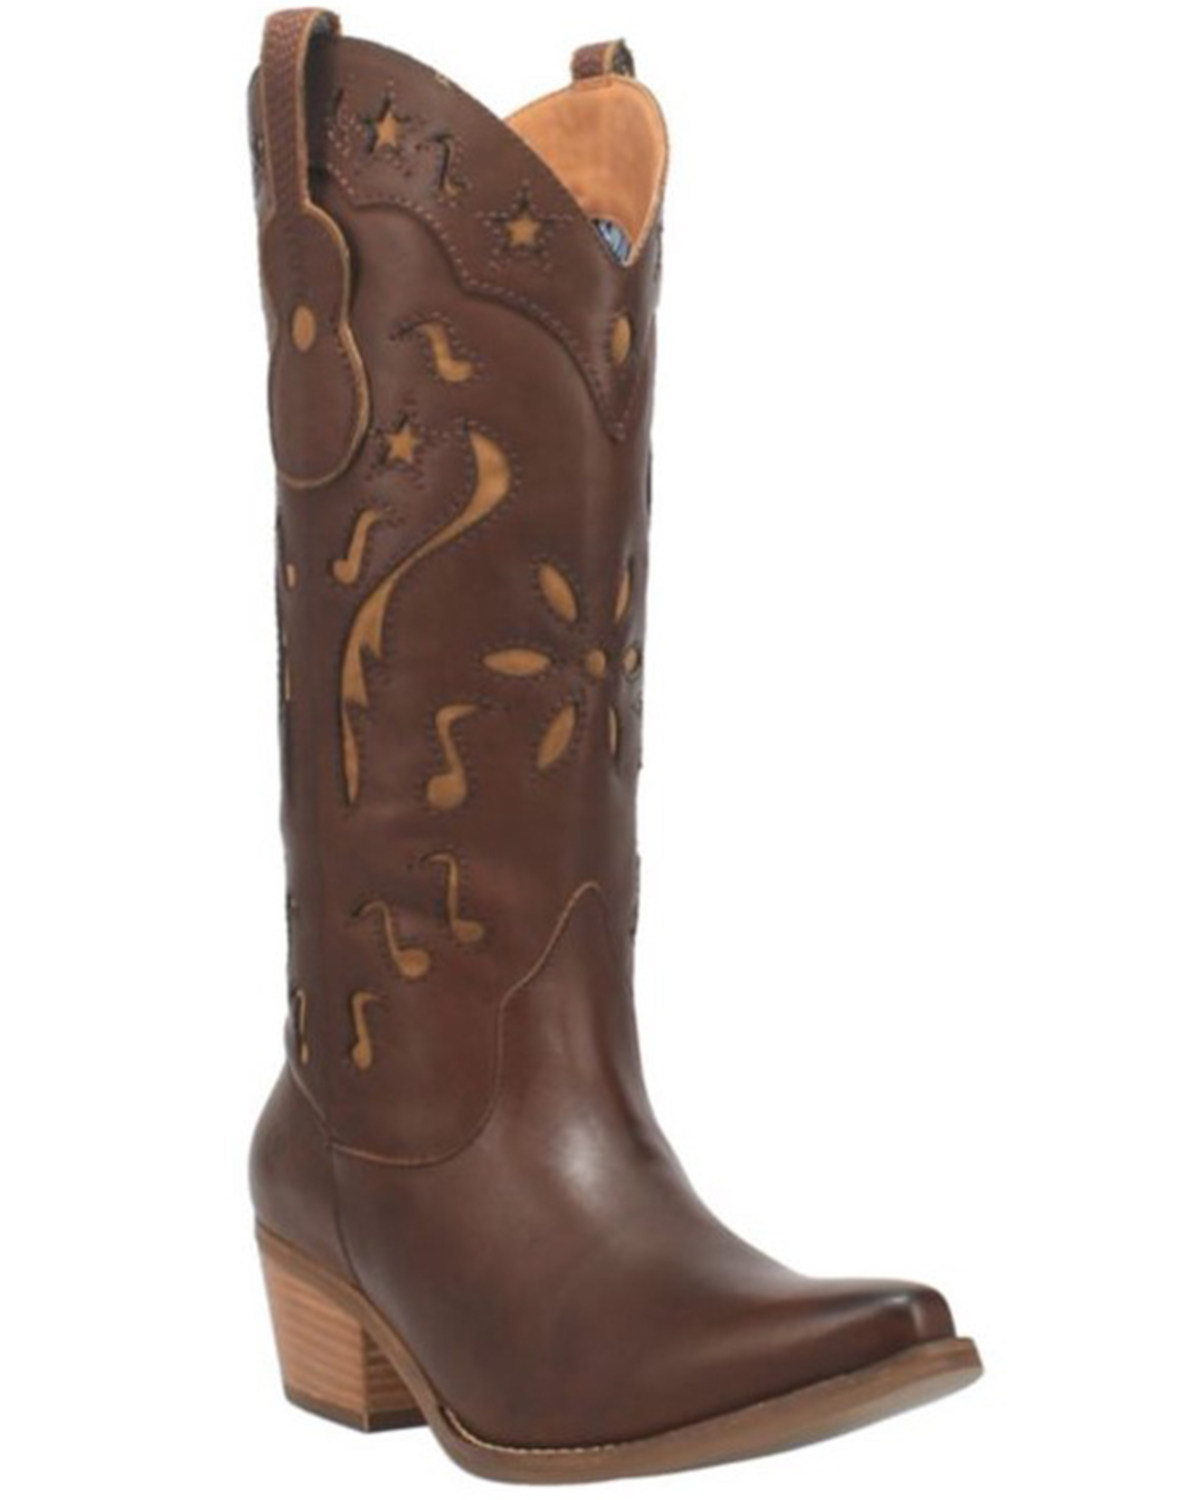 Dingo Women's Brown Burnished Western Boots - Snip Toe